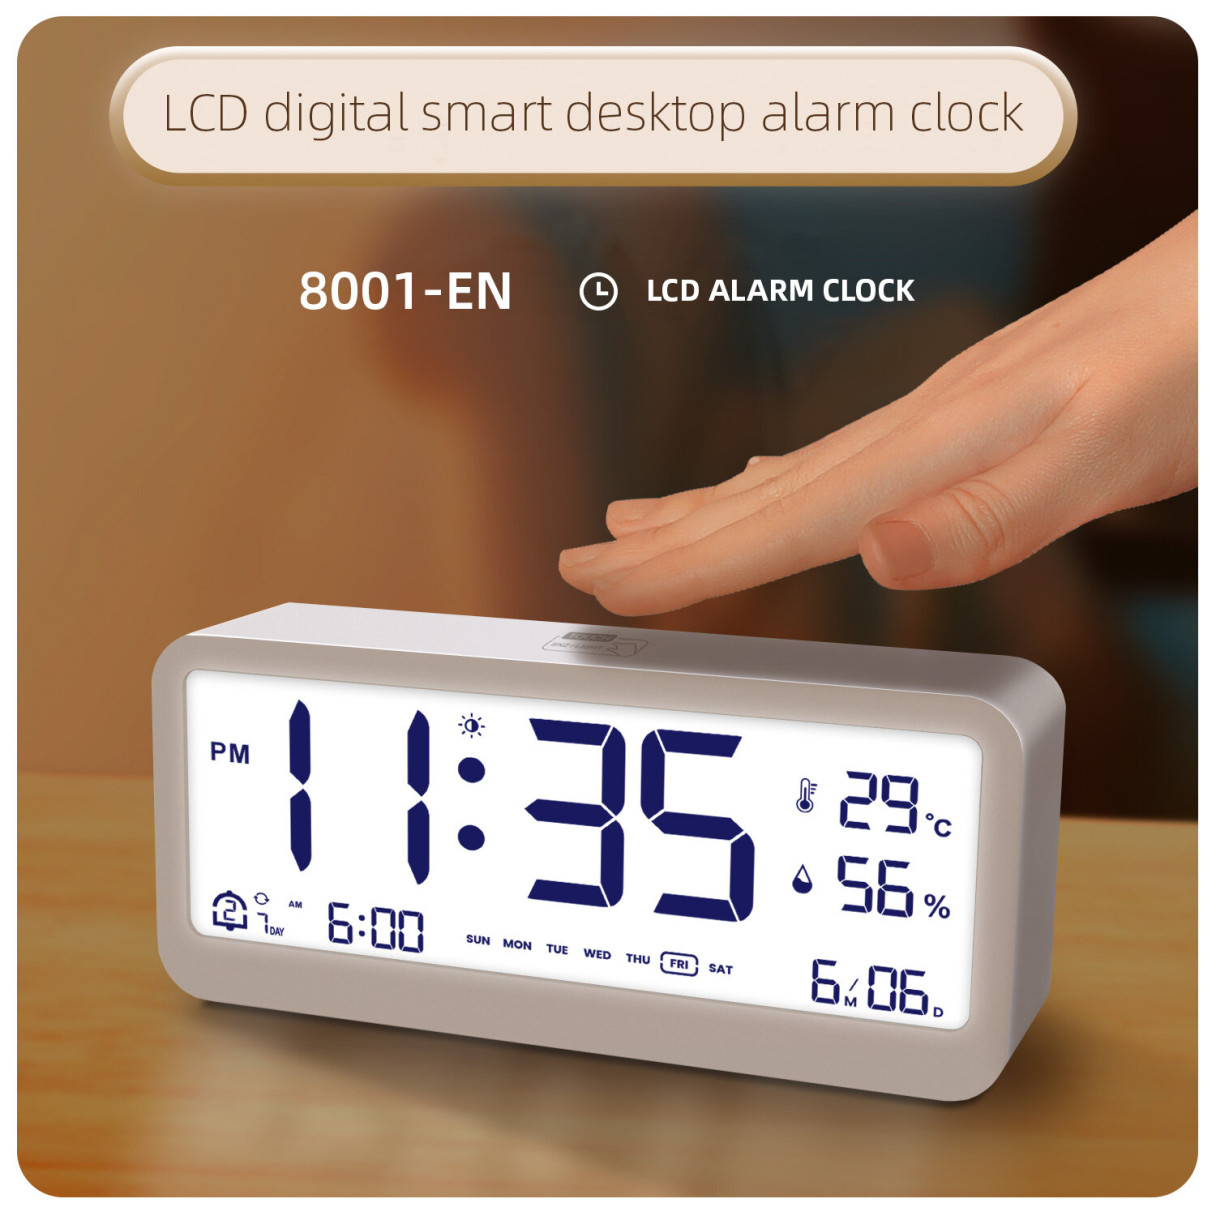 LCD Smart Digital Alarm Clock with Large Display Thermometer Hygrometer Anti-Slip Bottom with Night Light Battery Operated Safe Rounded Corners Design for Home Office Bedroom